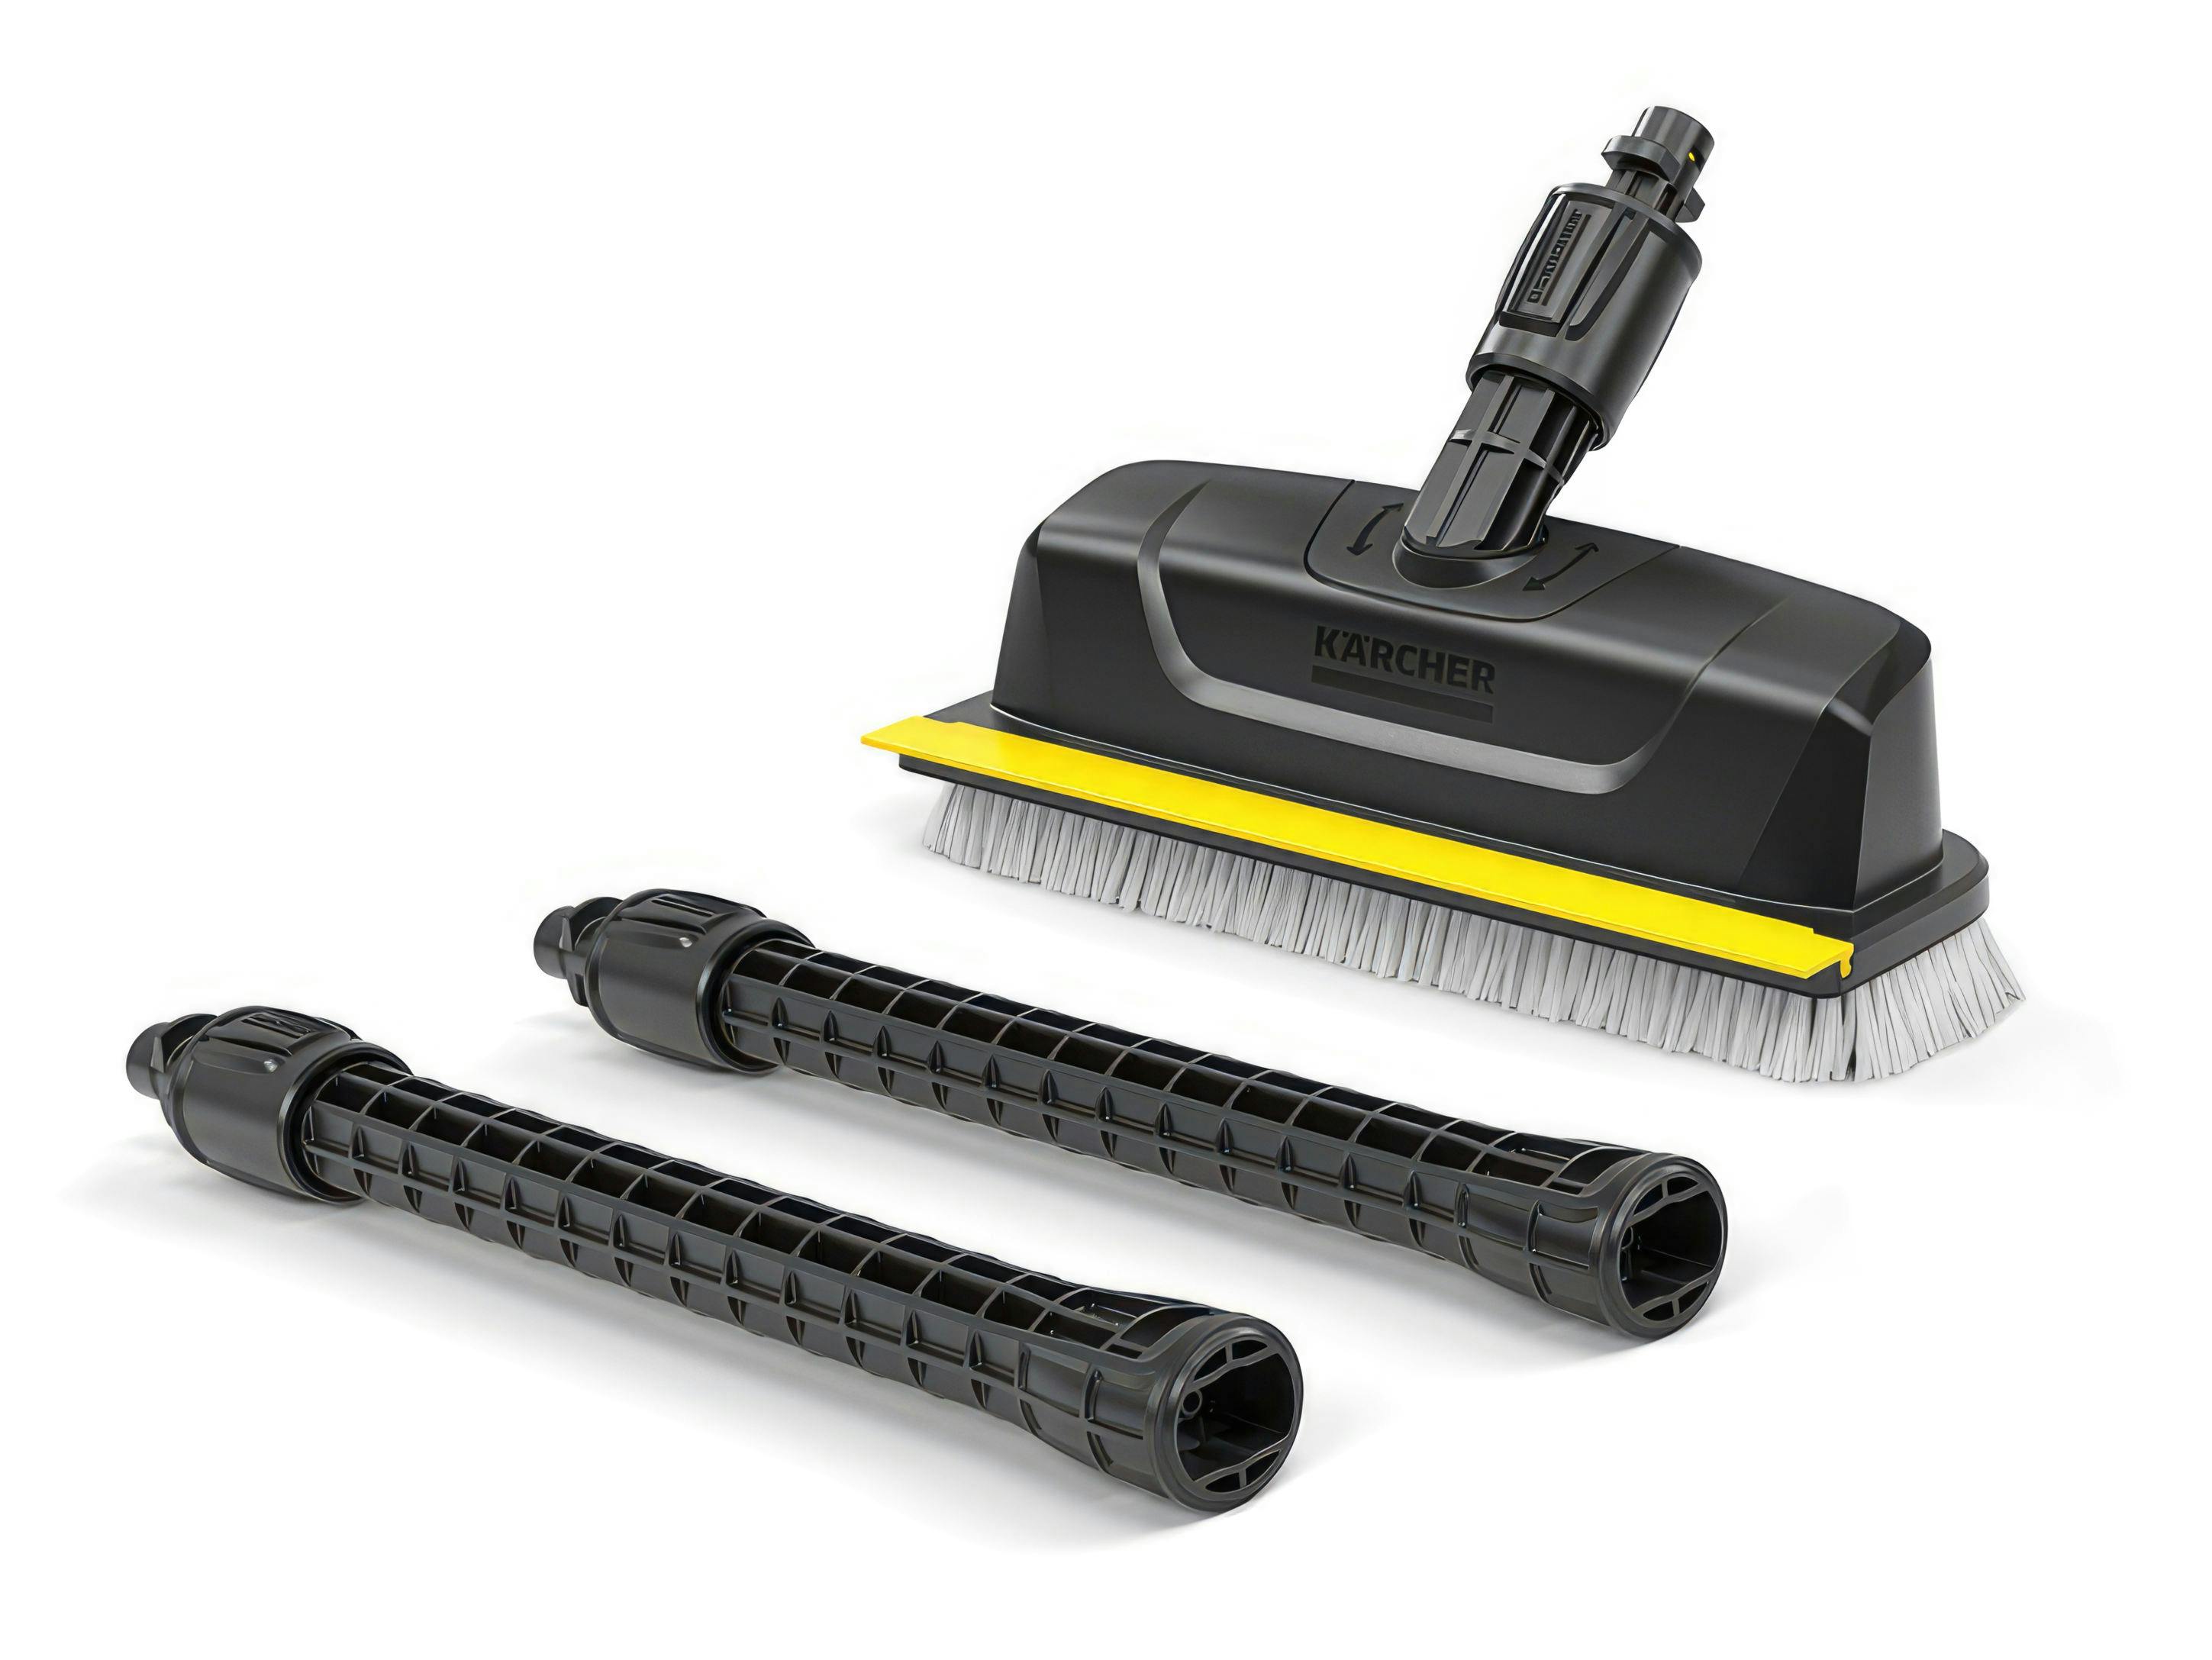 https://tradetested.imgix.net/catalog/product/_/2/_2.644-212.0_karcher_ps30_plus_power_scrubber_surface_cleaner_k2_-_k7-1b.jpg?fit=fillmax&fill=solid&auto=format%2Ccompress